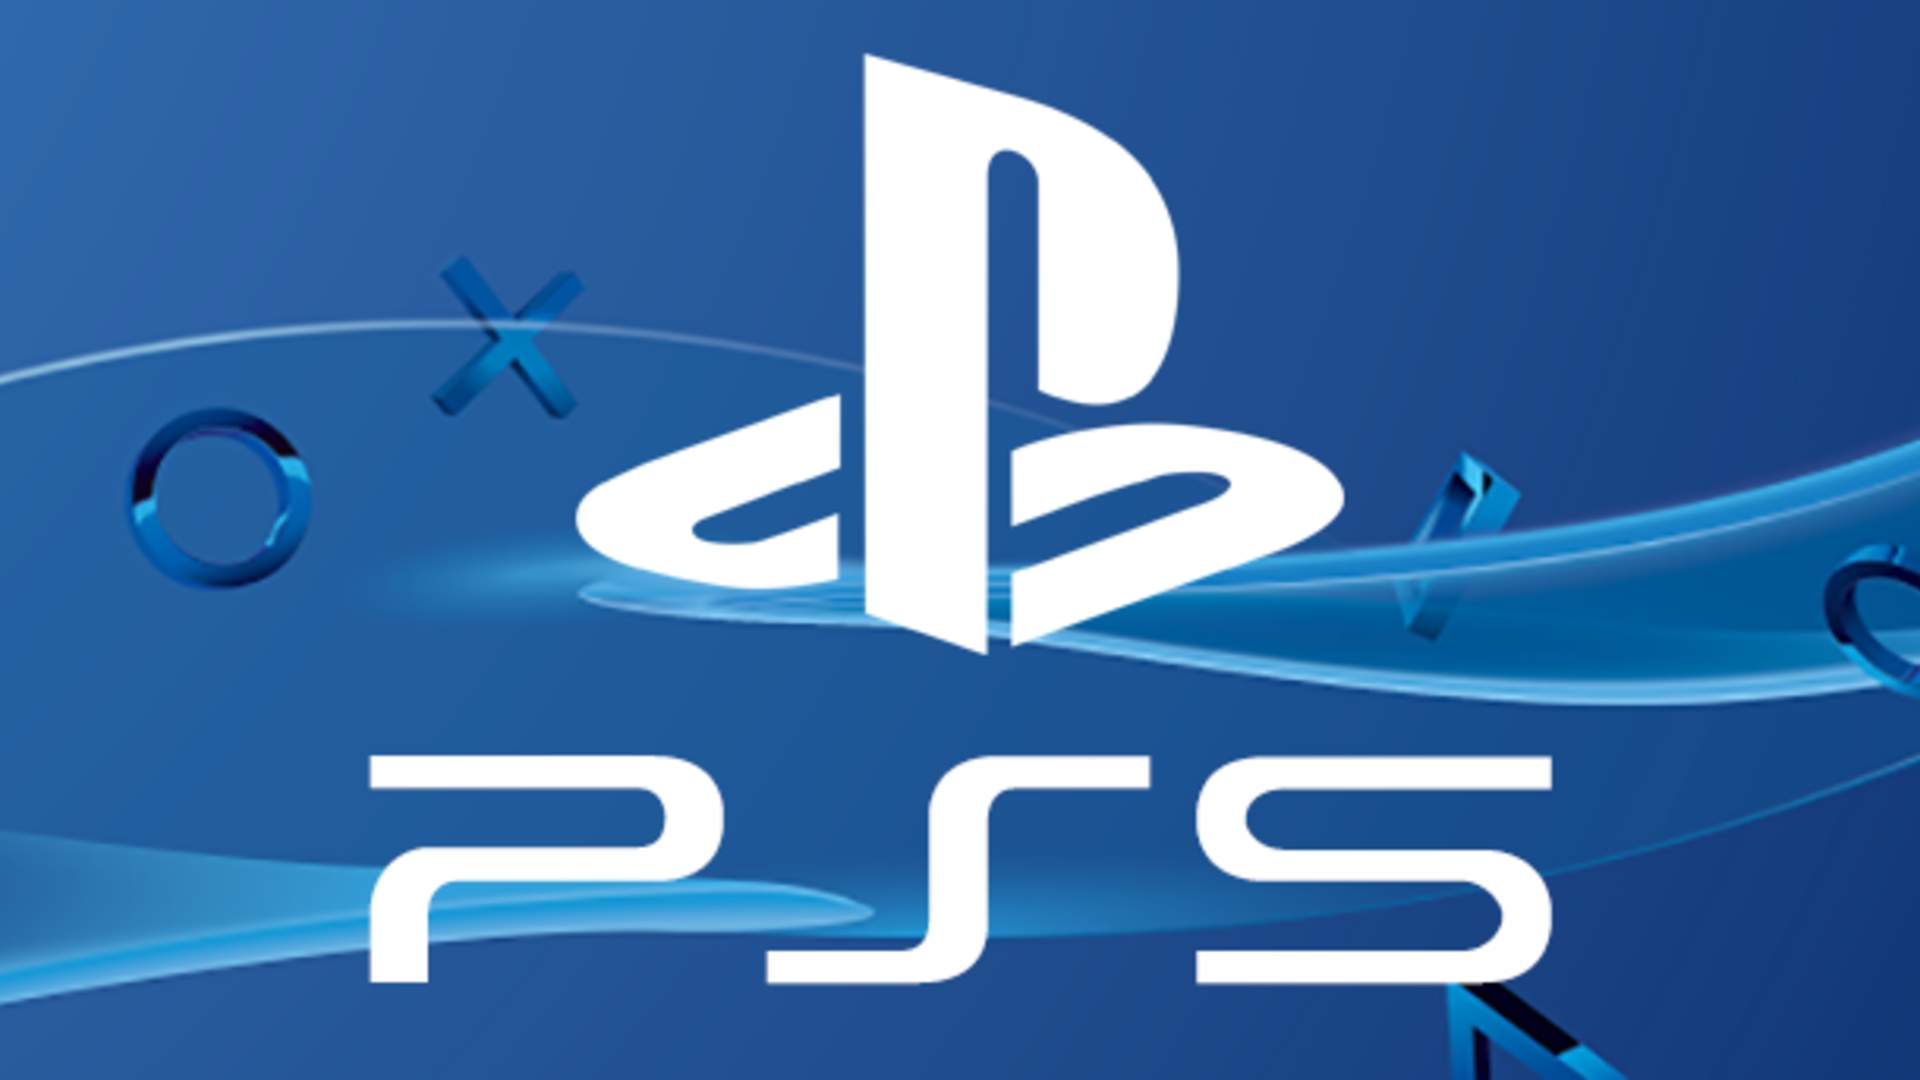 PS5 Release Date Revealed, Hard Drive and Ray Tracing